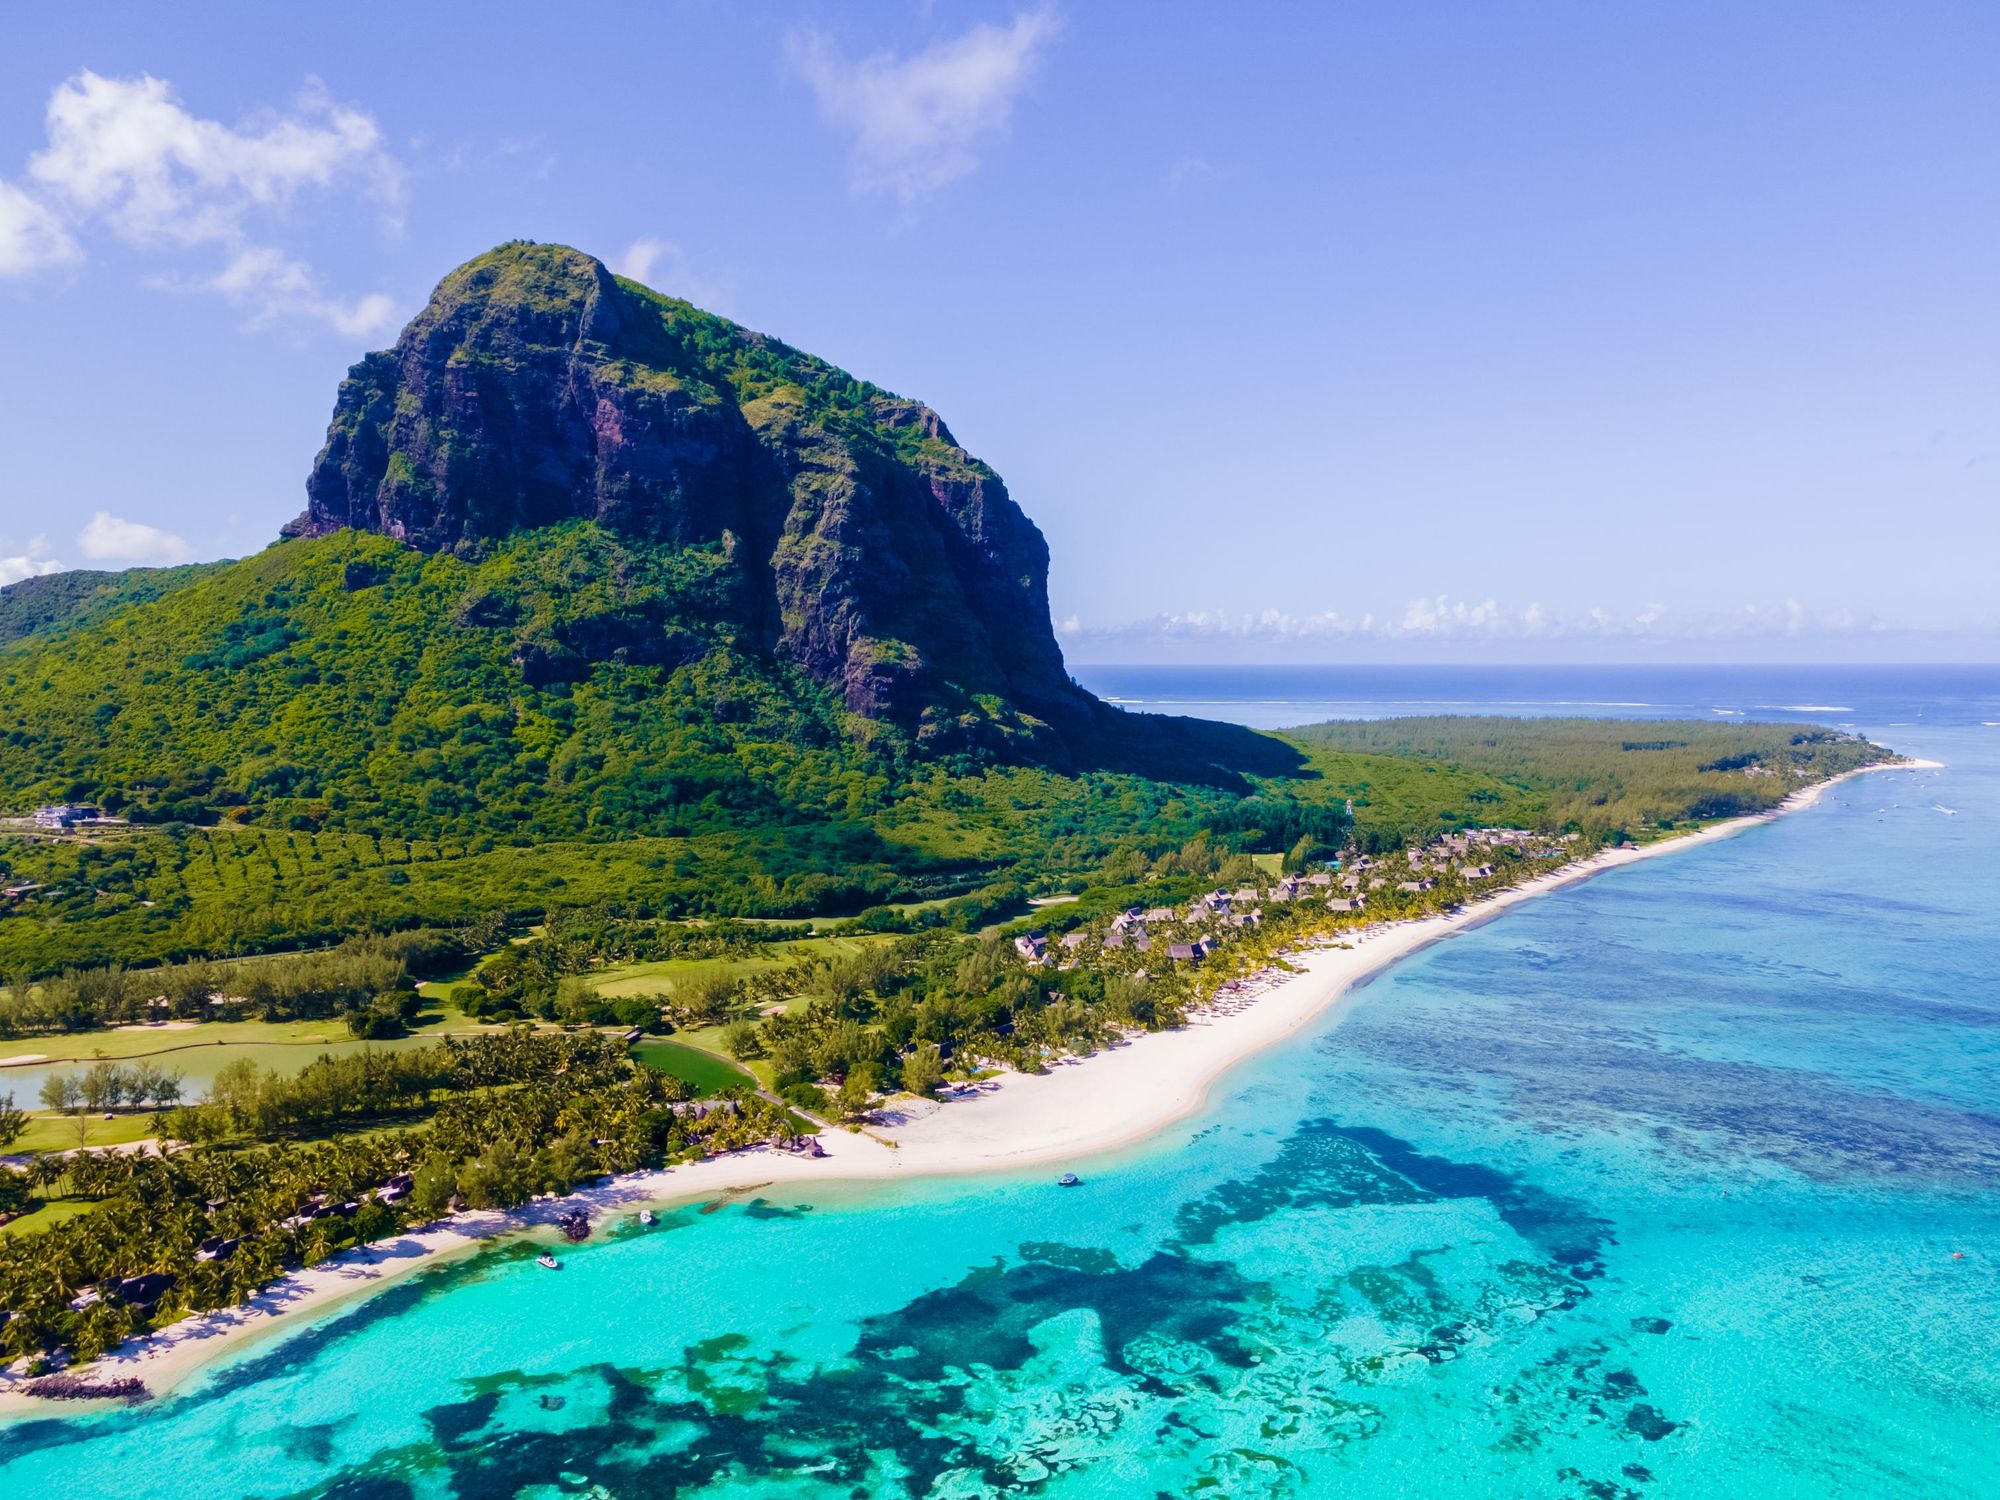 The remarkable Le Morne Brabant Mountain, on the coast of Mauritius. Photo: Getty